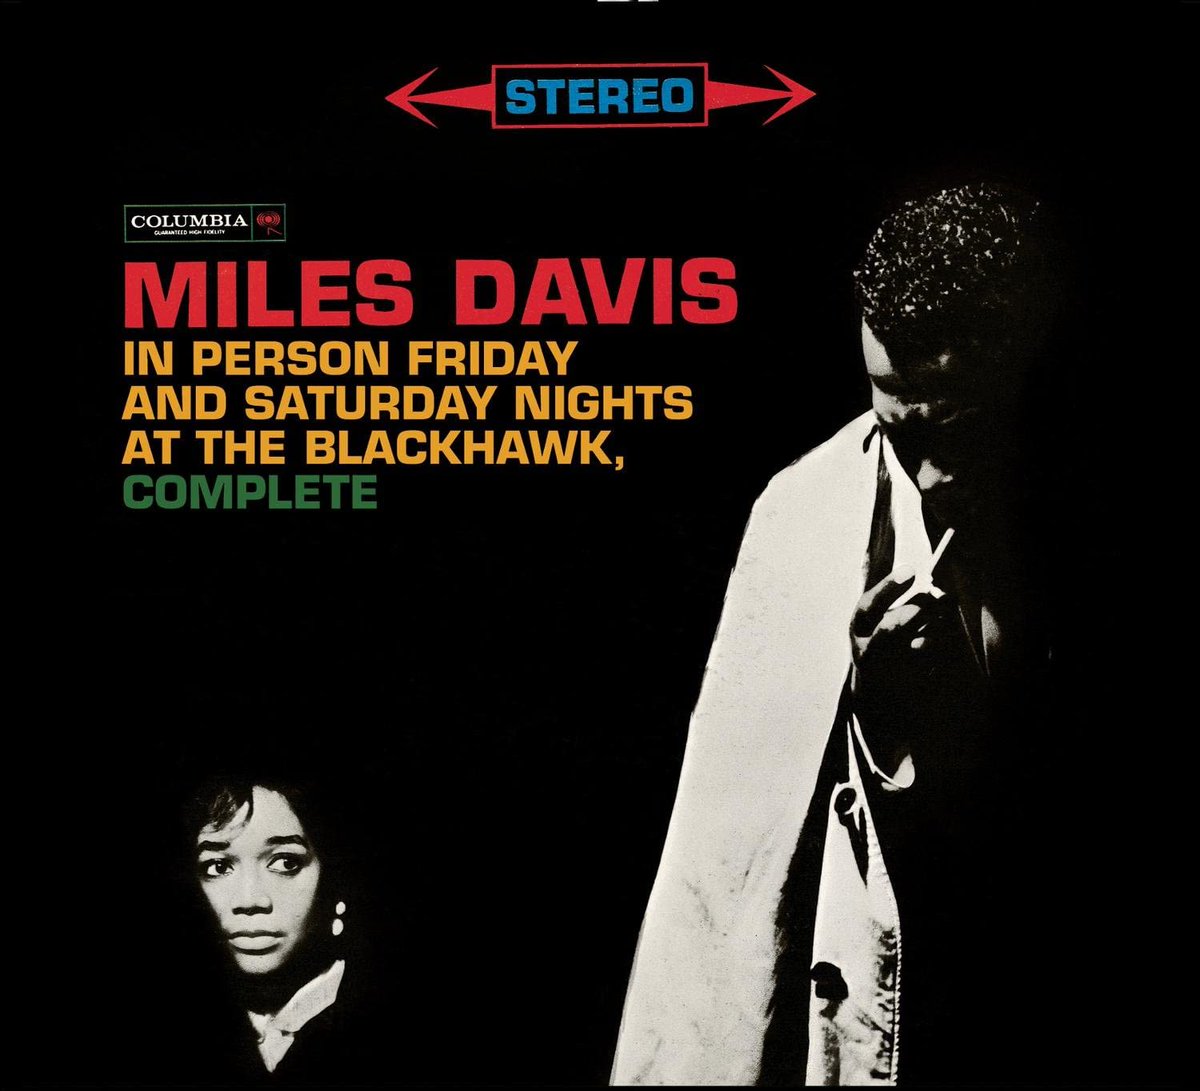 Miles Davis In PersonFriday & Saturday Nights at the Blackhawk, Complete (1961)
#NowPlaying 'CD4' 'Autumn Leaves', 'Neo', 'Two Bass Hit', 'Bye Bye(Theme)', 'Love, I've Found You', 'I Thought About You', 'Someday My Prince Will Come', 'Softly As in a Morning Sunrise'